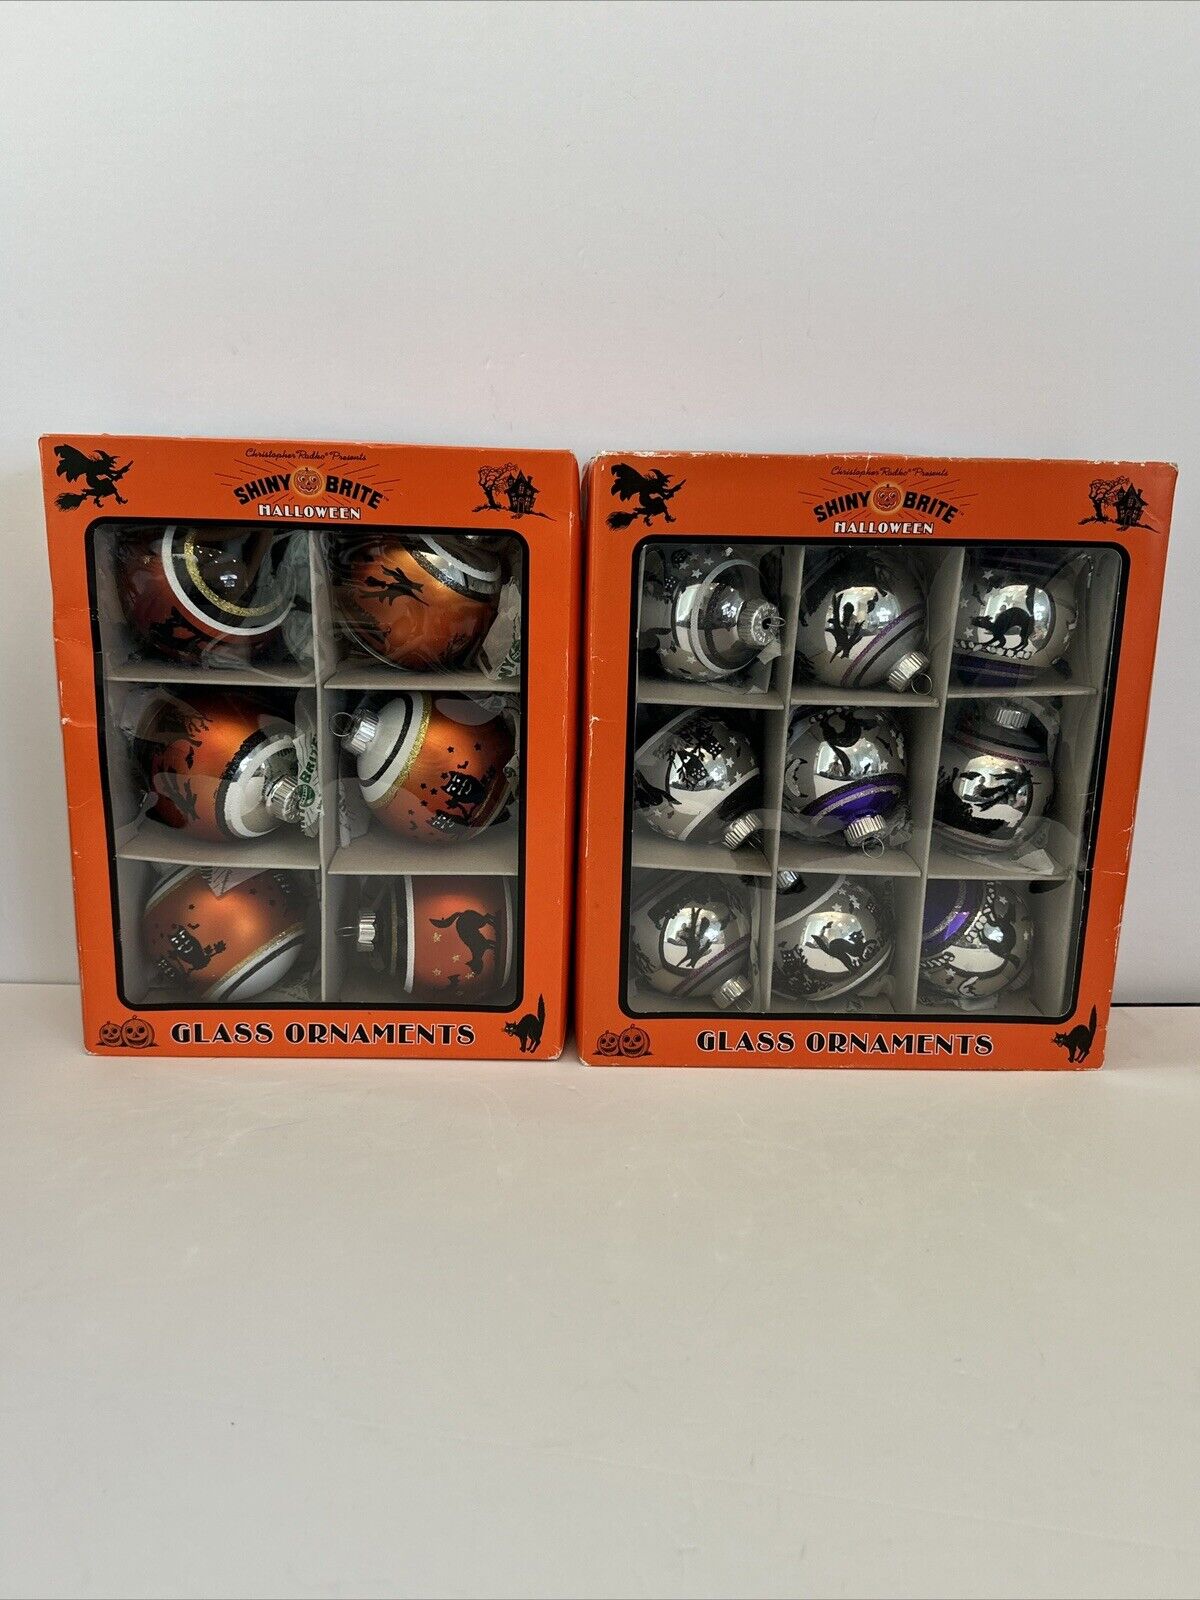 Christopher Radko Shiney Brite Halloween Glass Ornaments Set of Witches Cats Owl